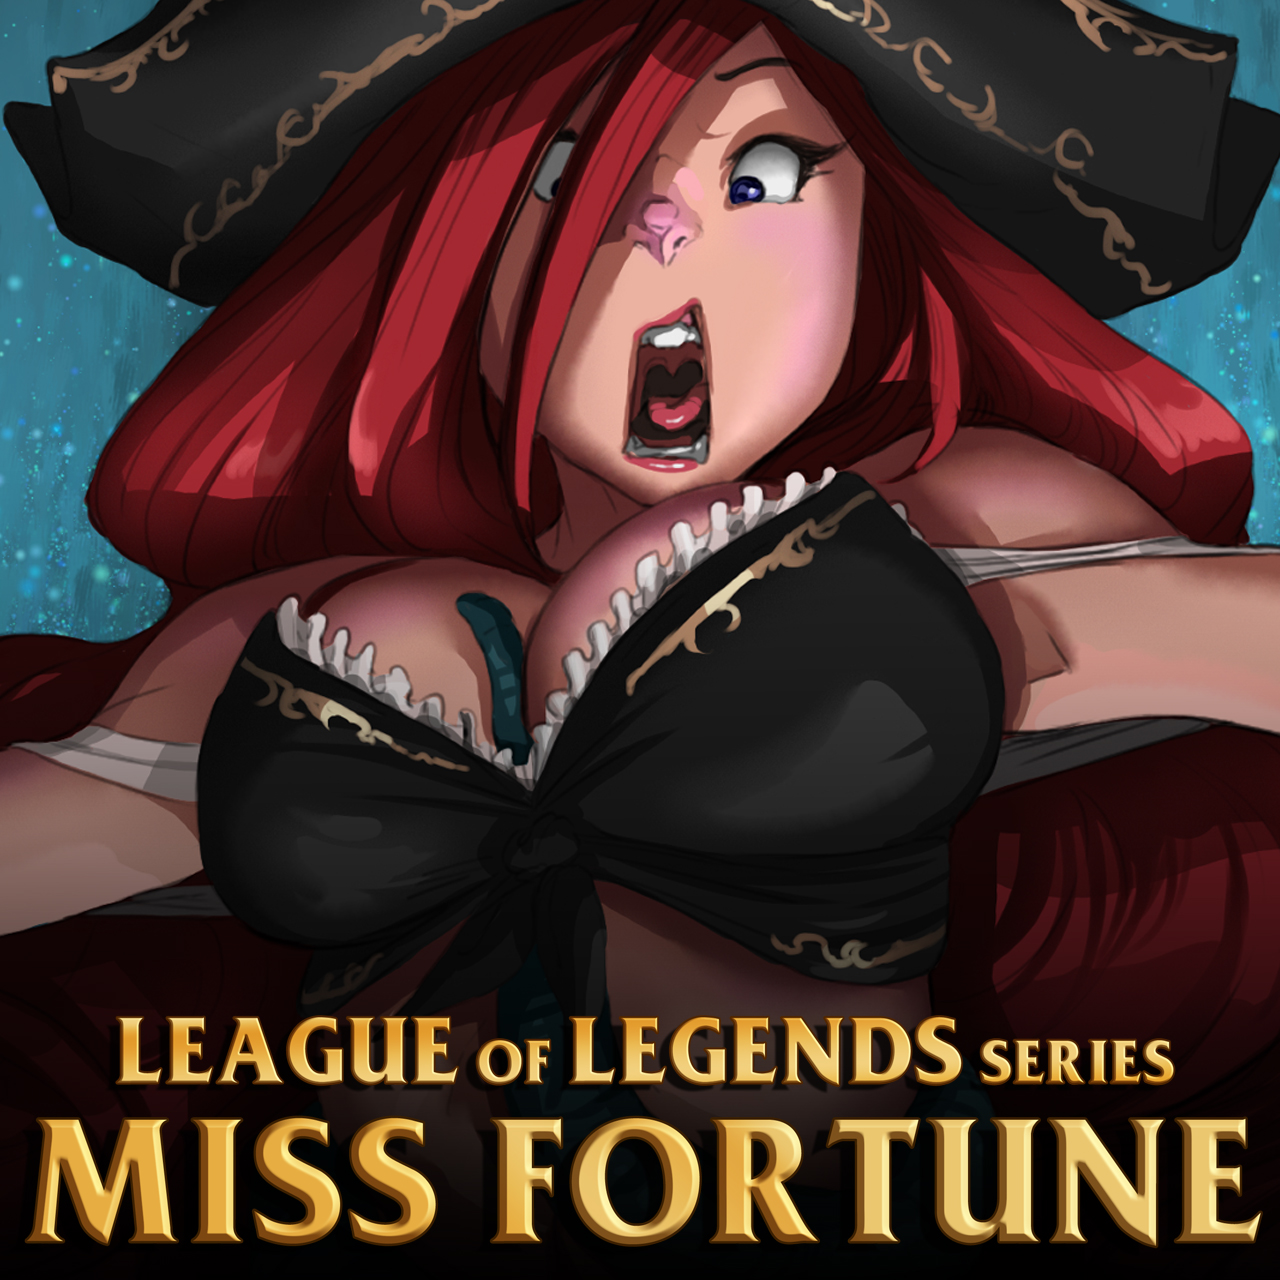 League of Legends Series: Miss Fortune